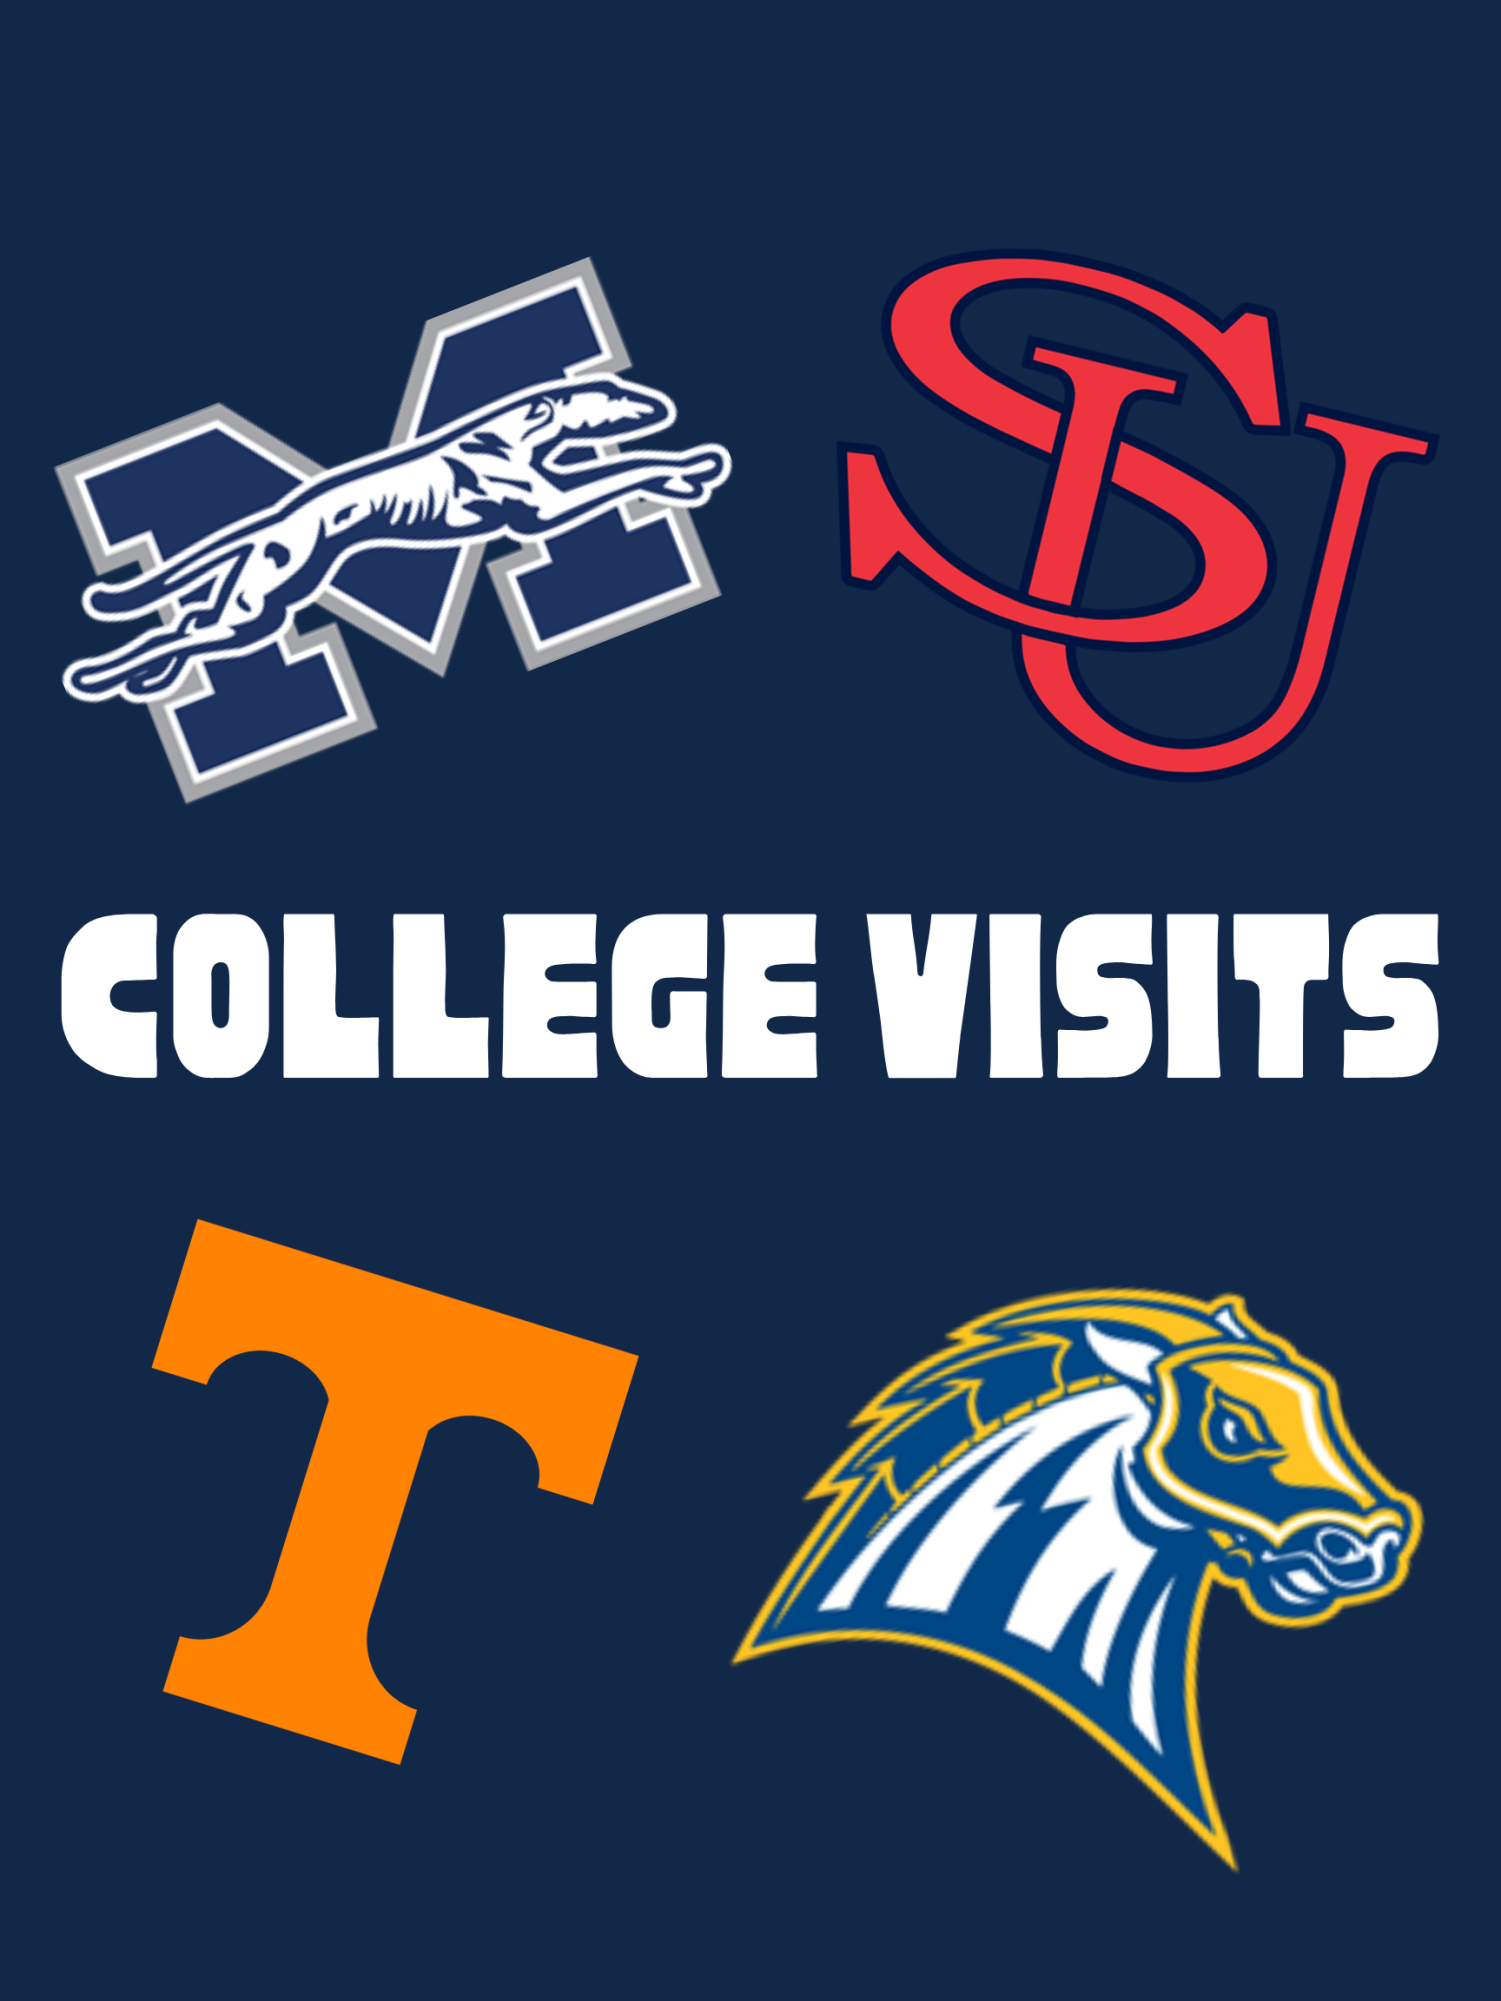 College Visits On The Way